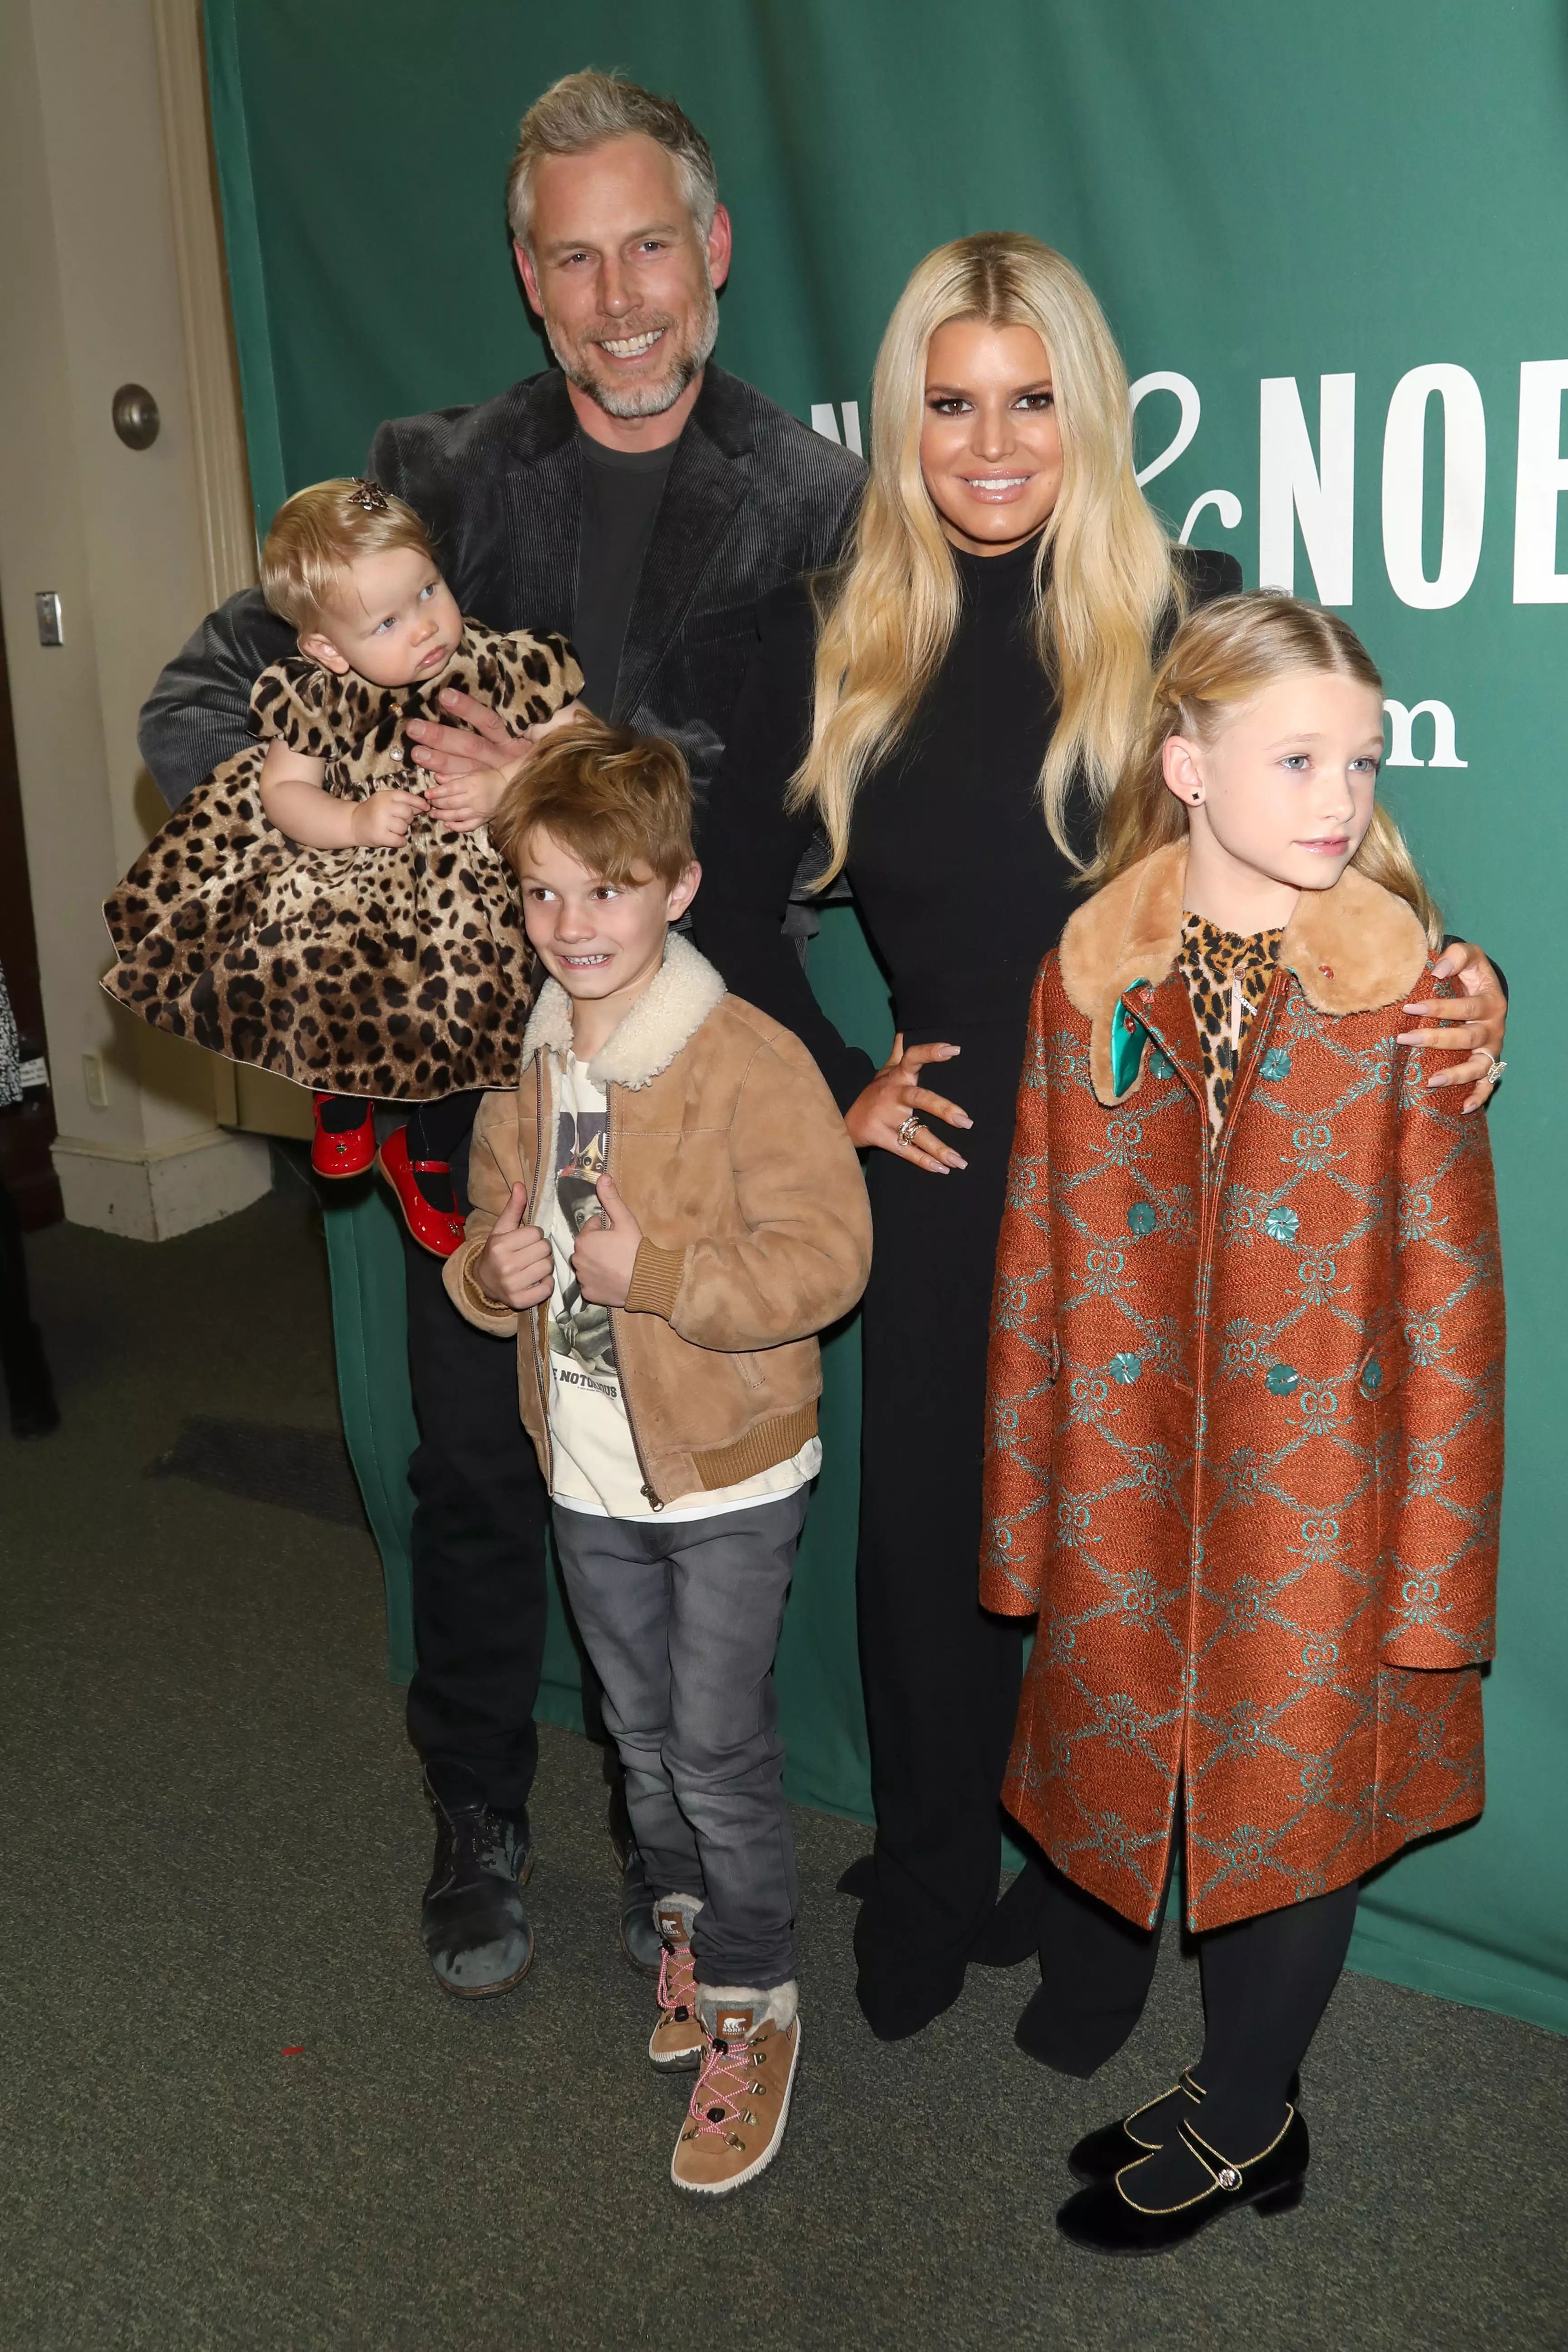 Jessica Simpson, Eric Johnson and their three kids at a book event for her memoir in 2020. (